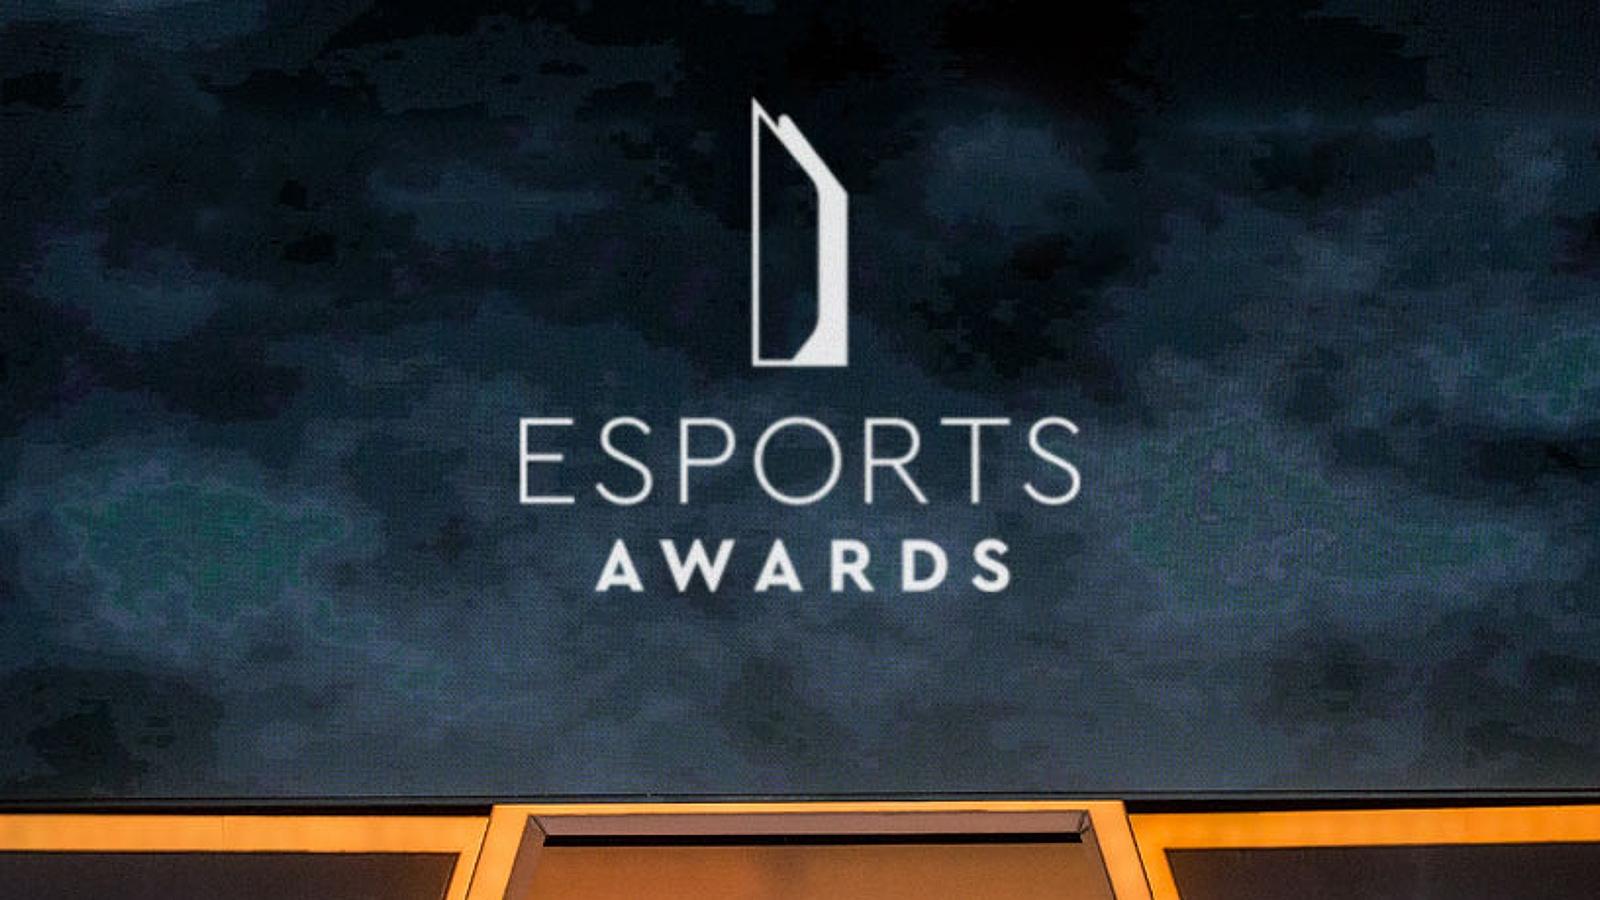 Business of Esports - Games For Change Reveals 2022 Award Winners